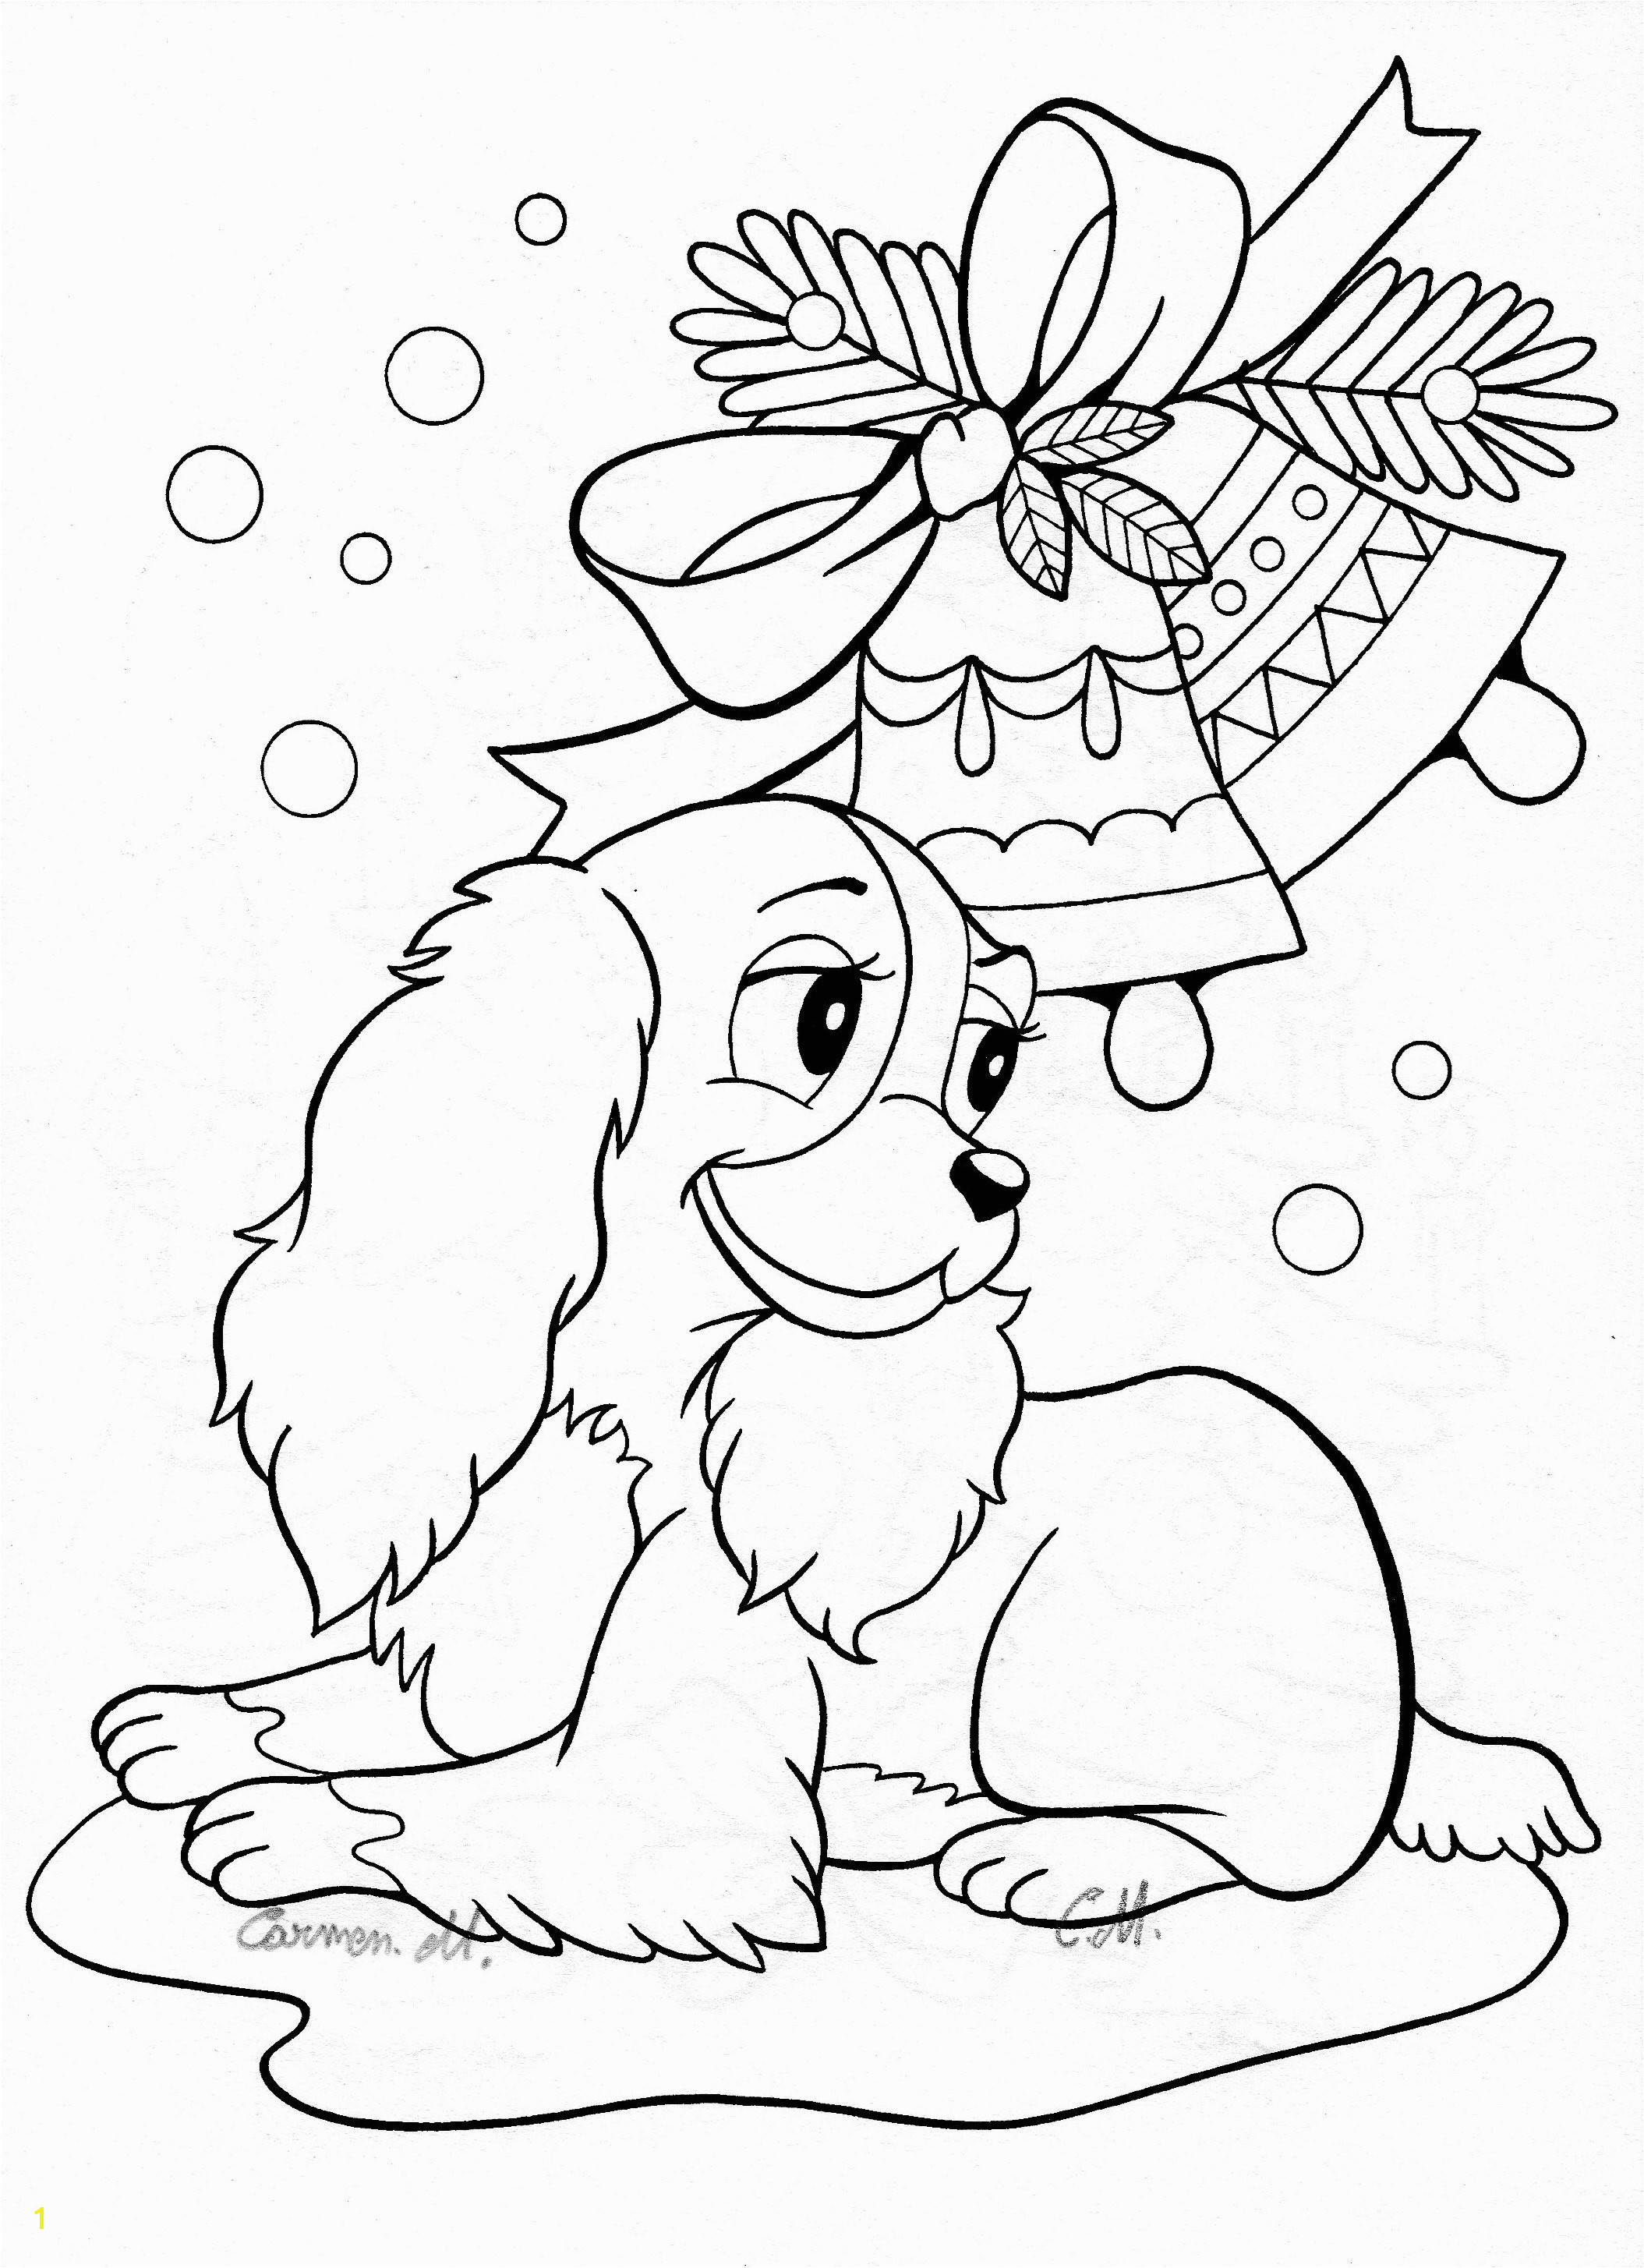 Dolphin Coloring Pages for Kids Dolphin Colouring New Dolphin Coloring Pages Pexels